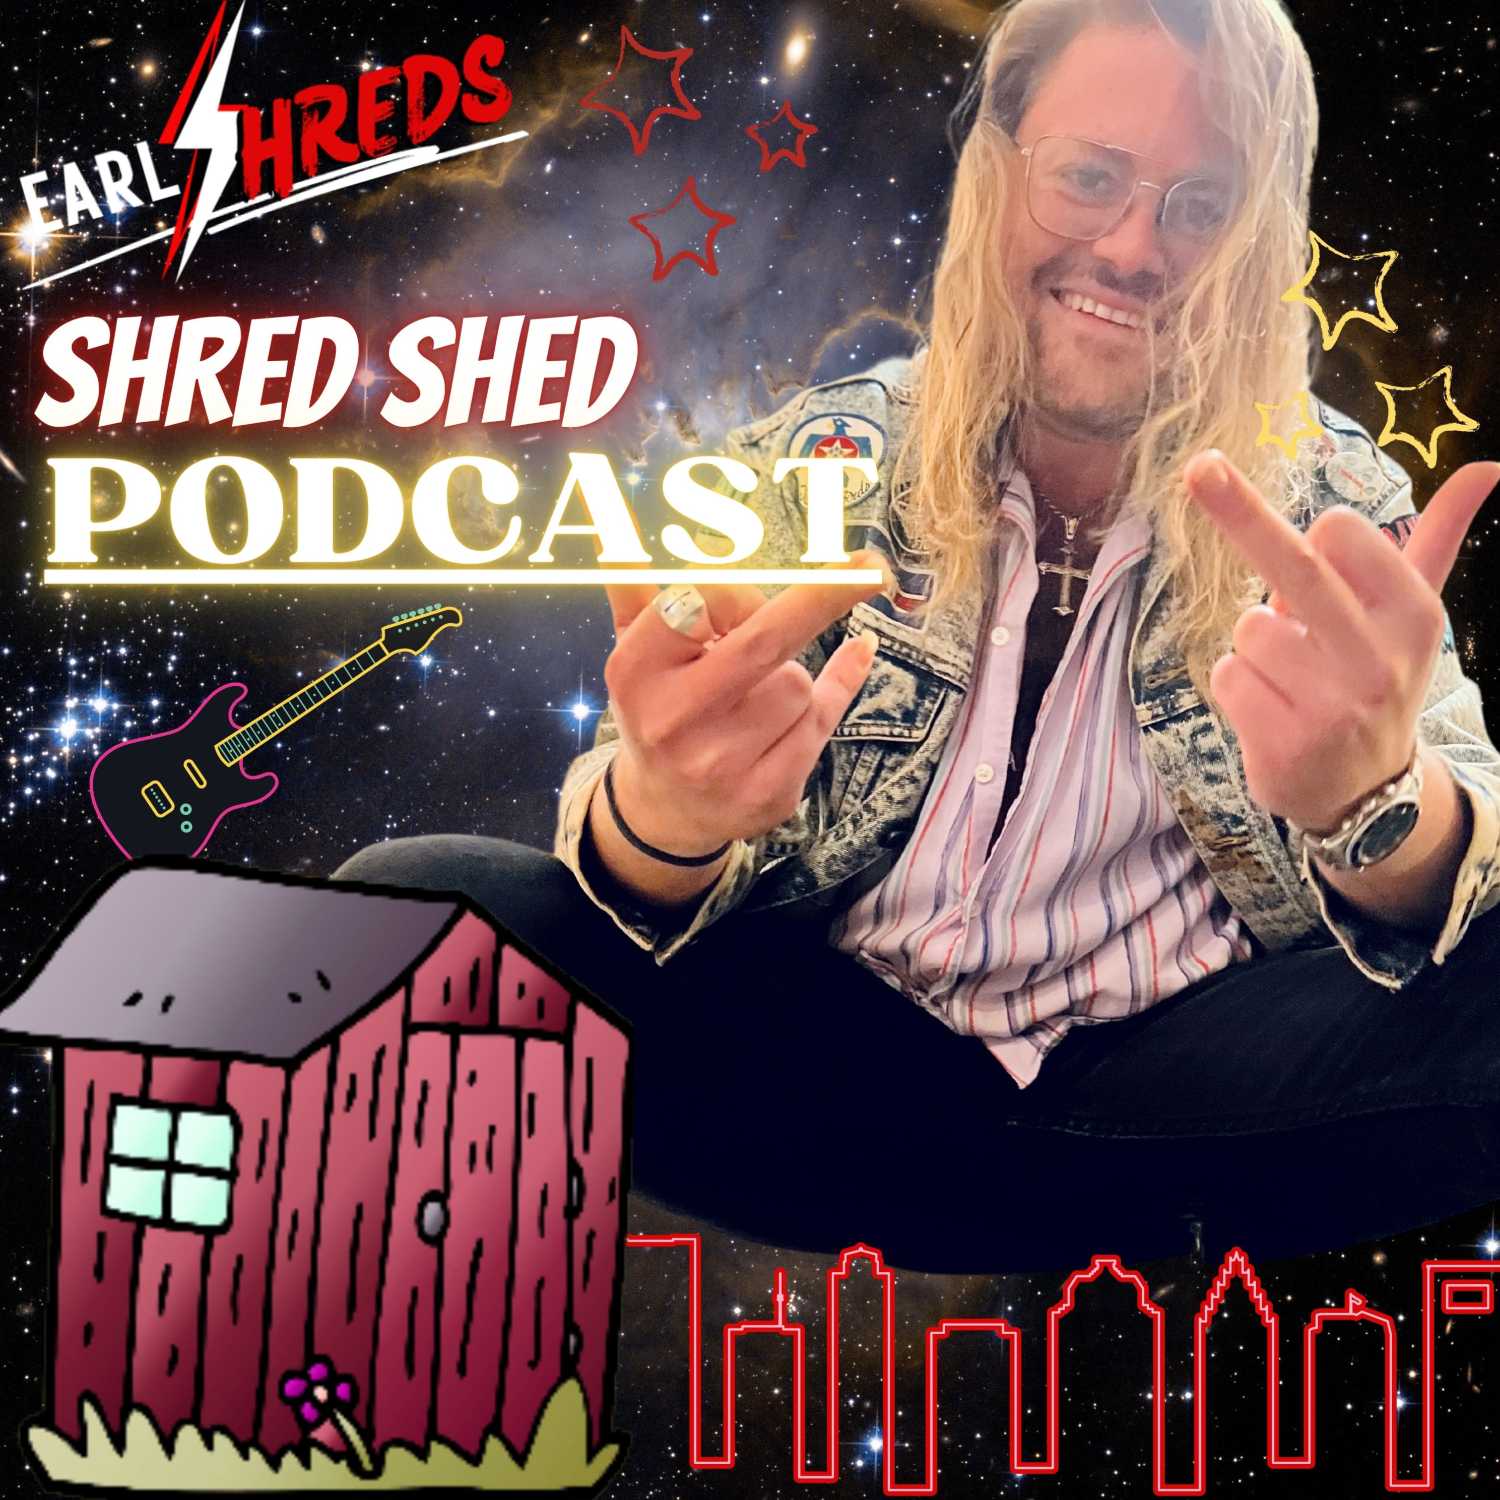 The Shred Shed Podcast!